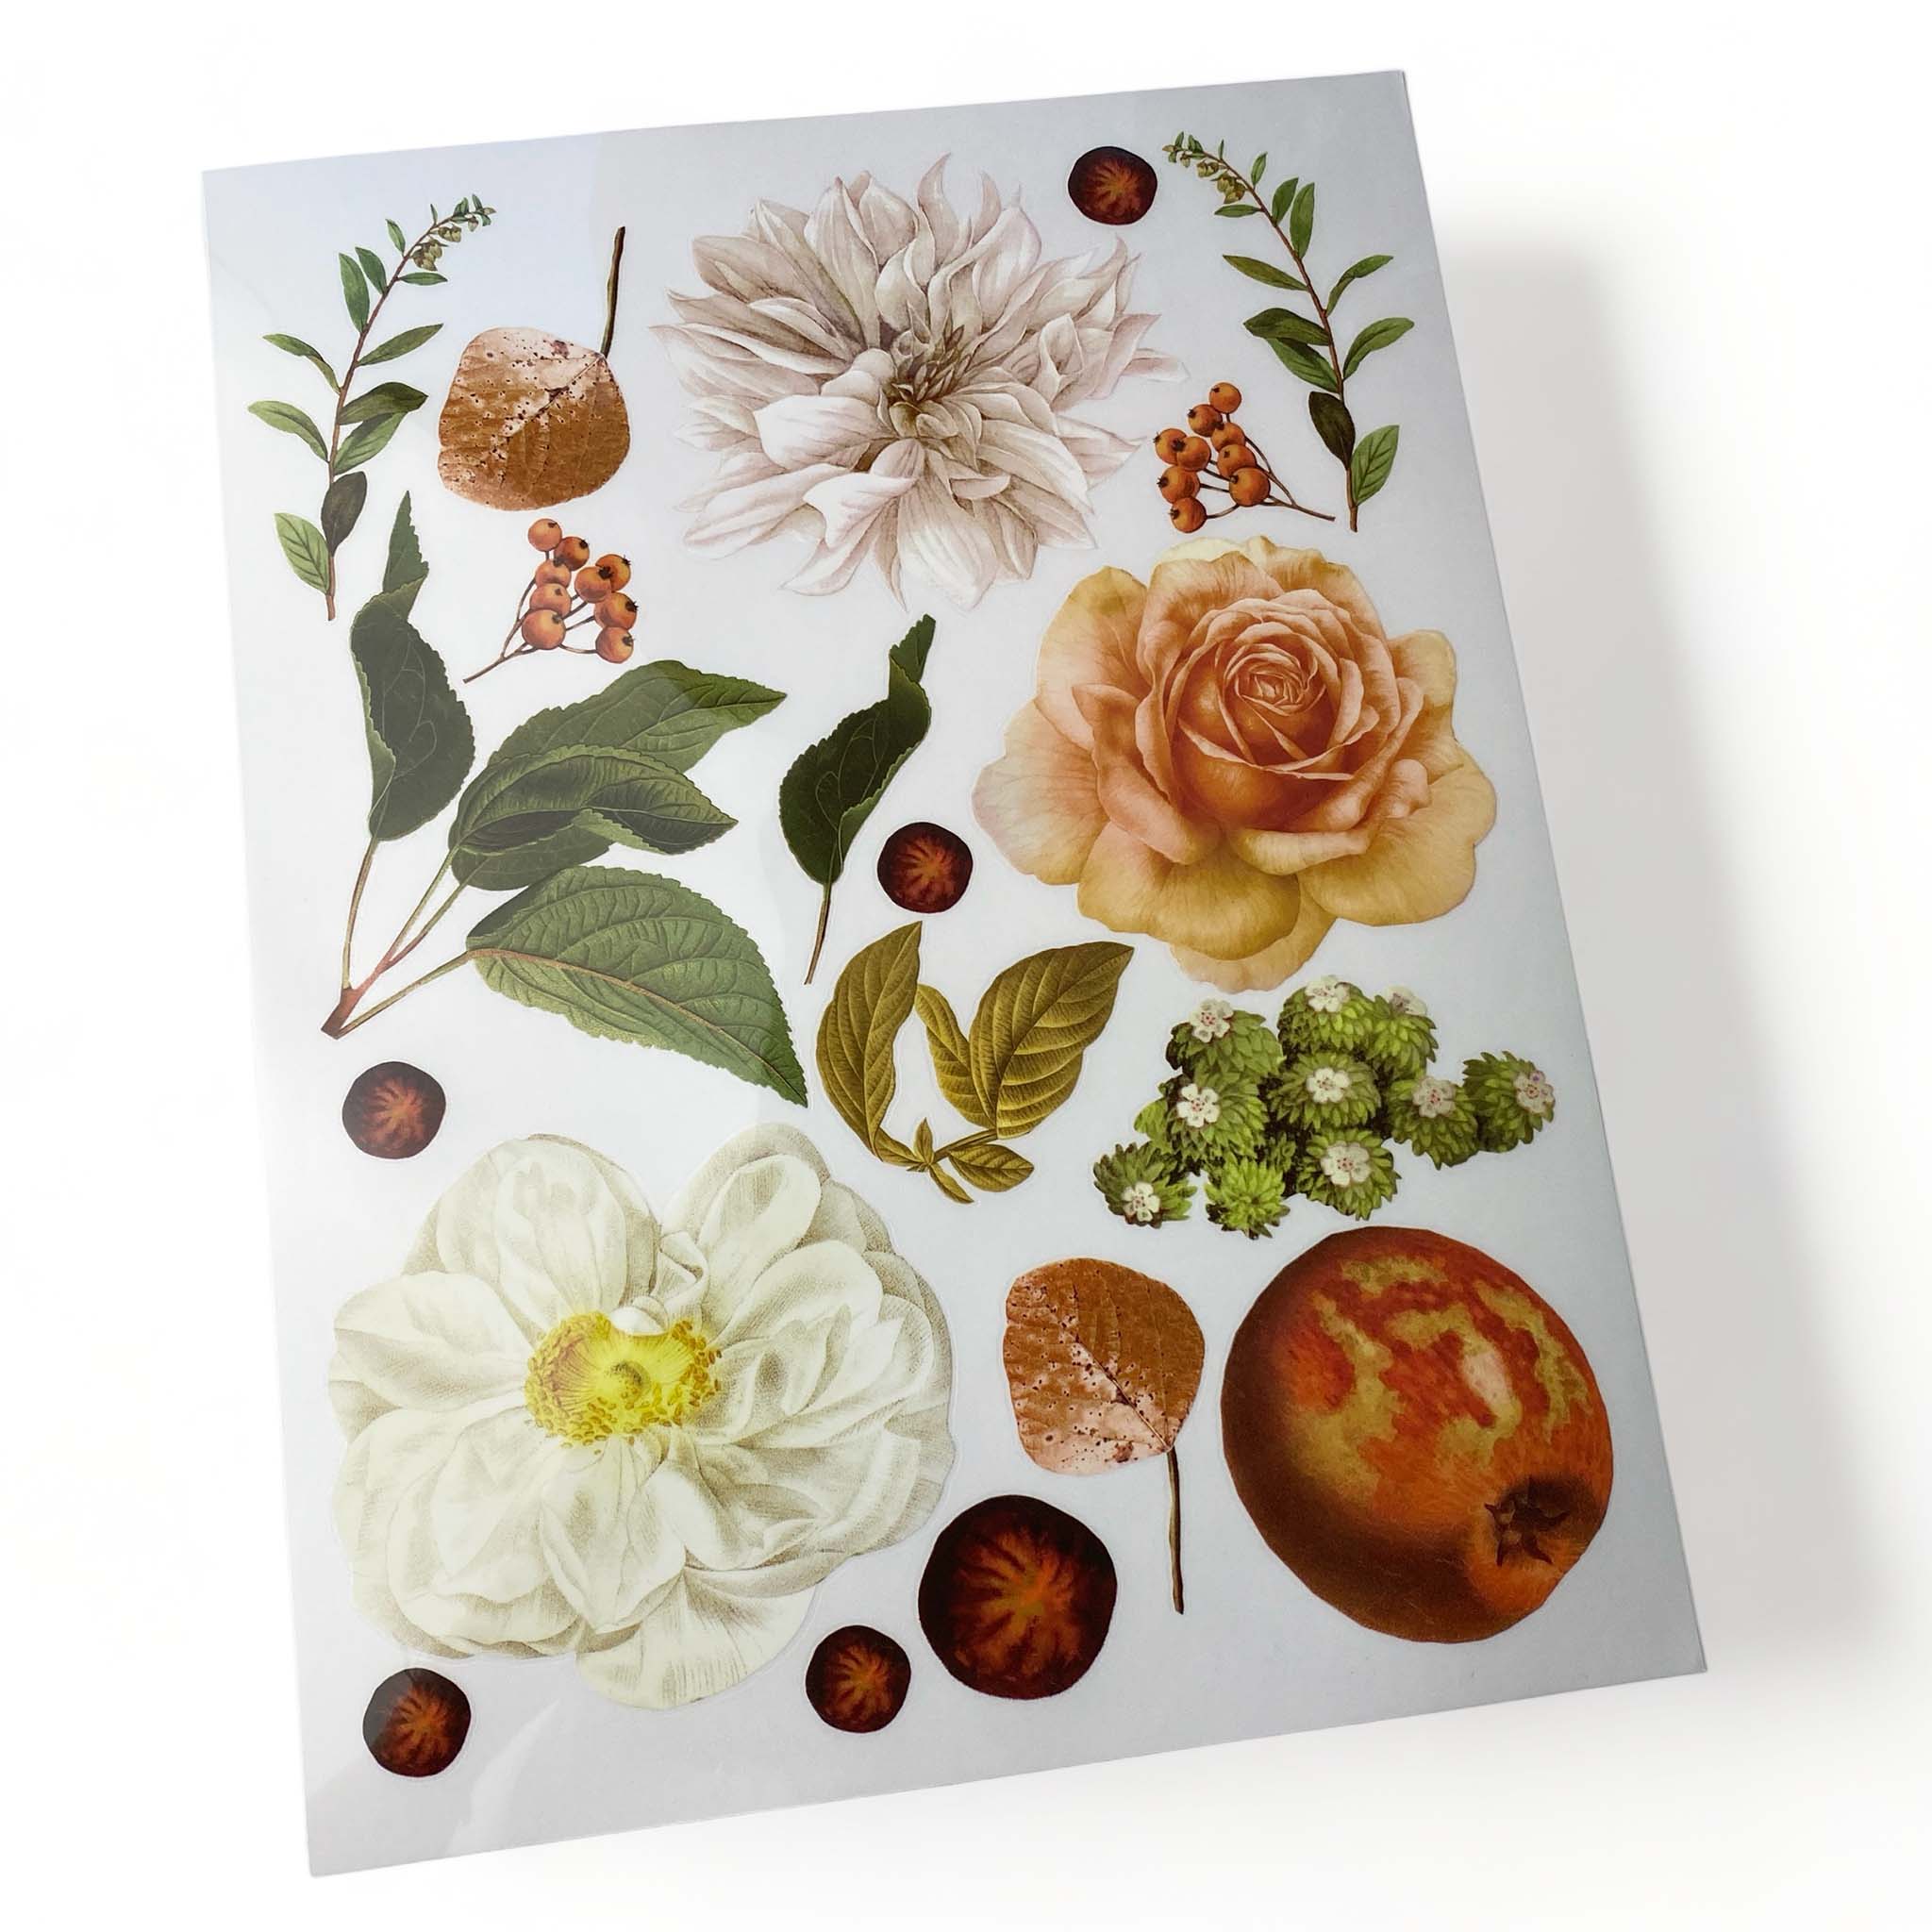 One sheet of ReDesign with Prima's Seasonal Splendor small rub-on transfer is against a white background.